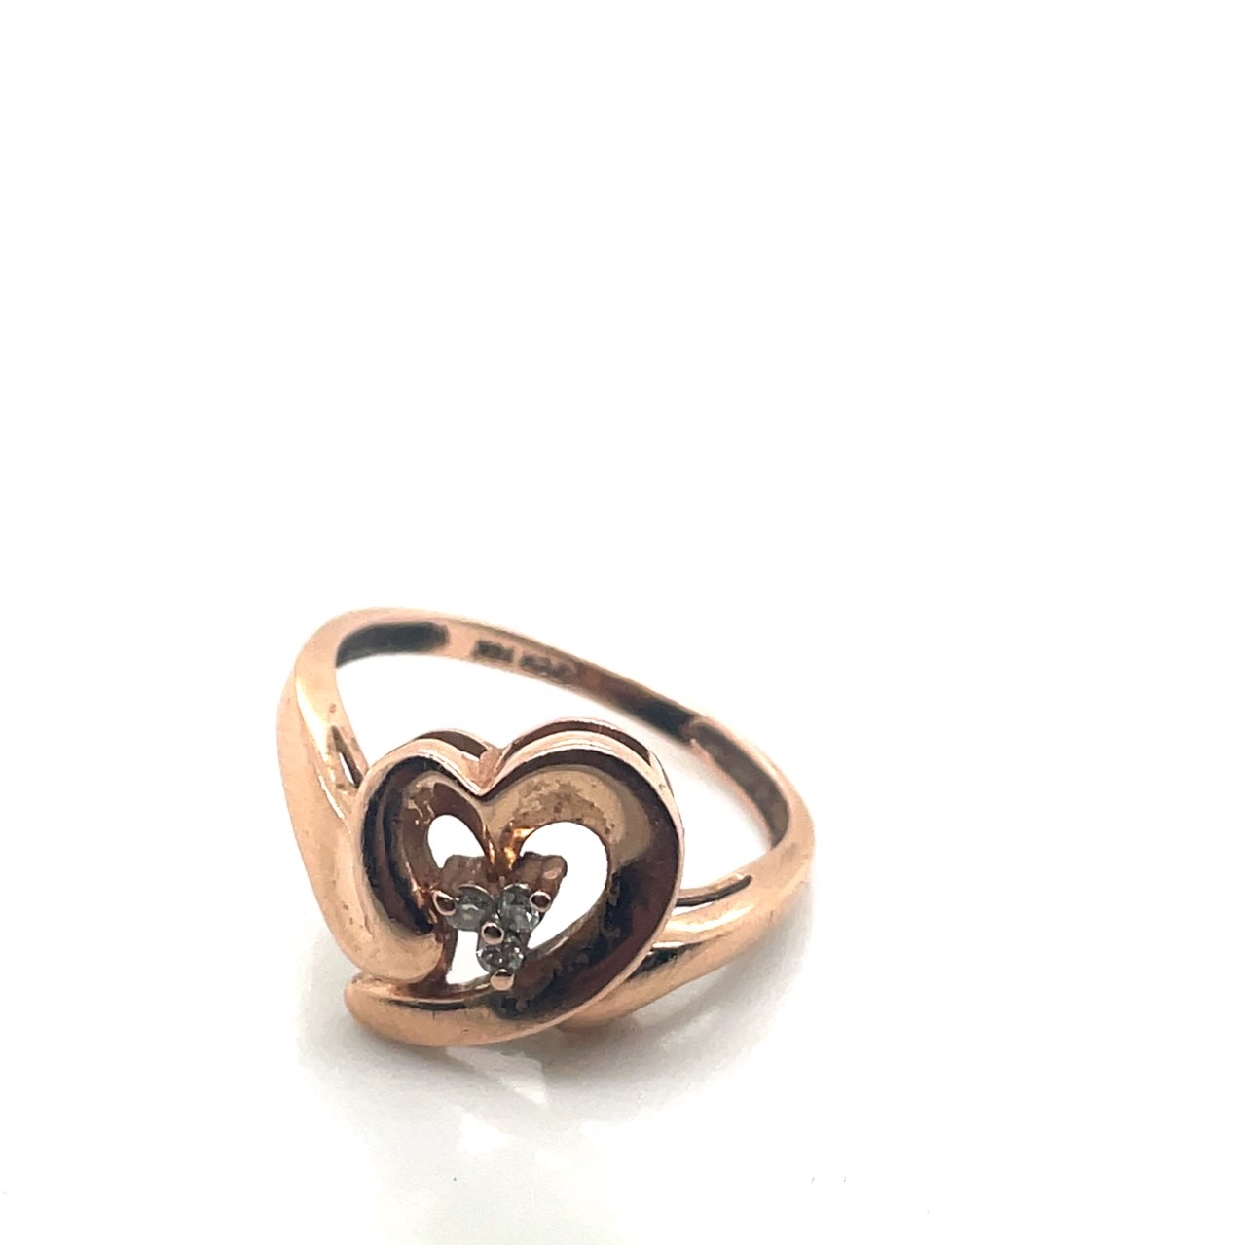 14K Rose Gold Heart Shaped Ring with Diamond Center Stones Size 5 